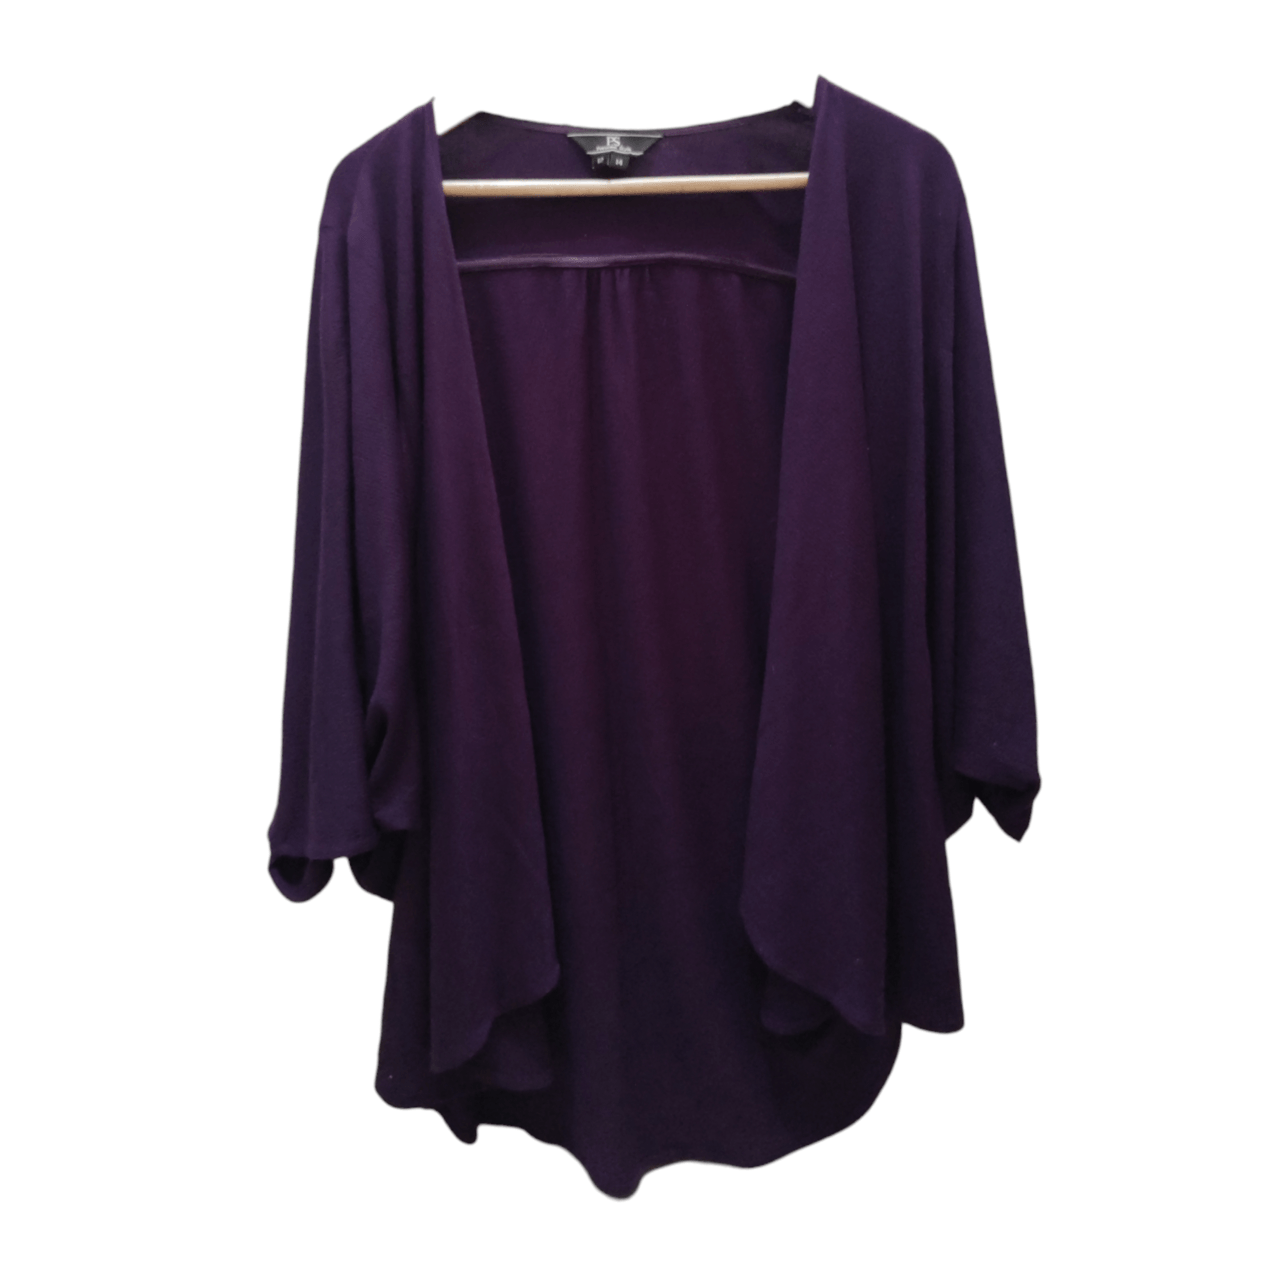 P.s. The Spirit Of Personal Style Violet Cardigan